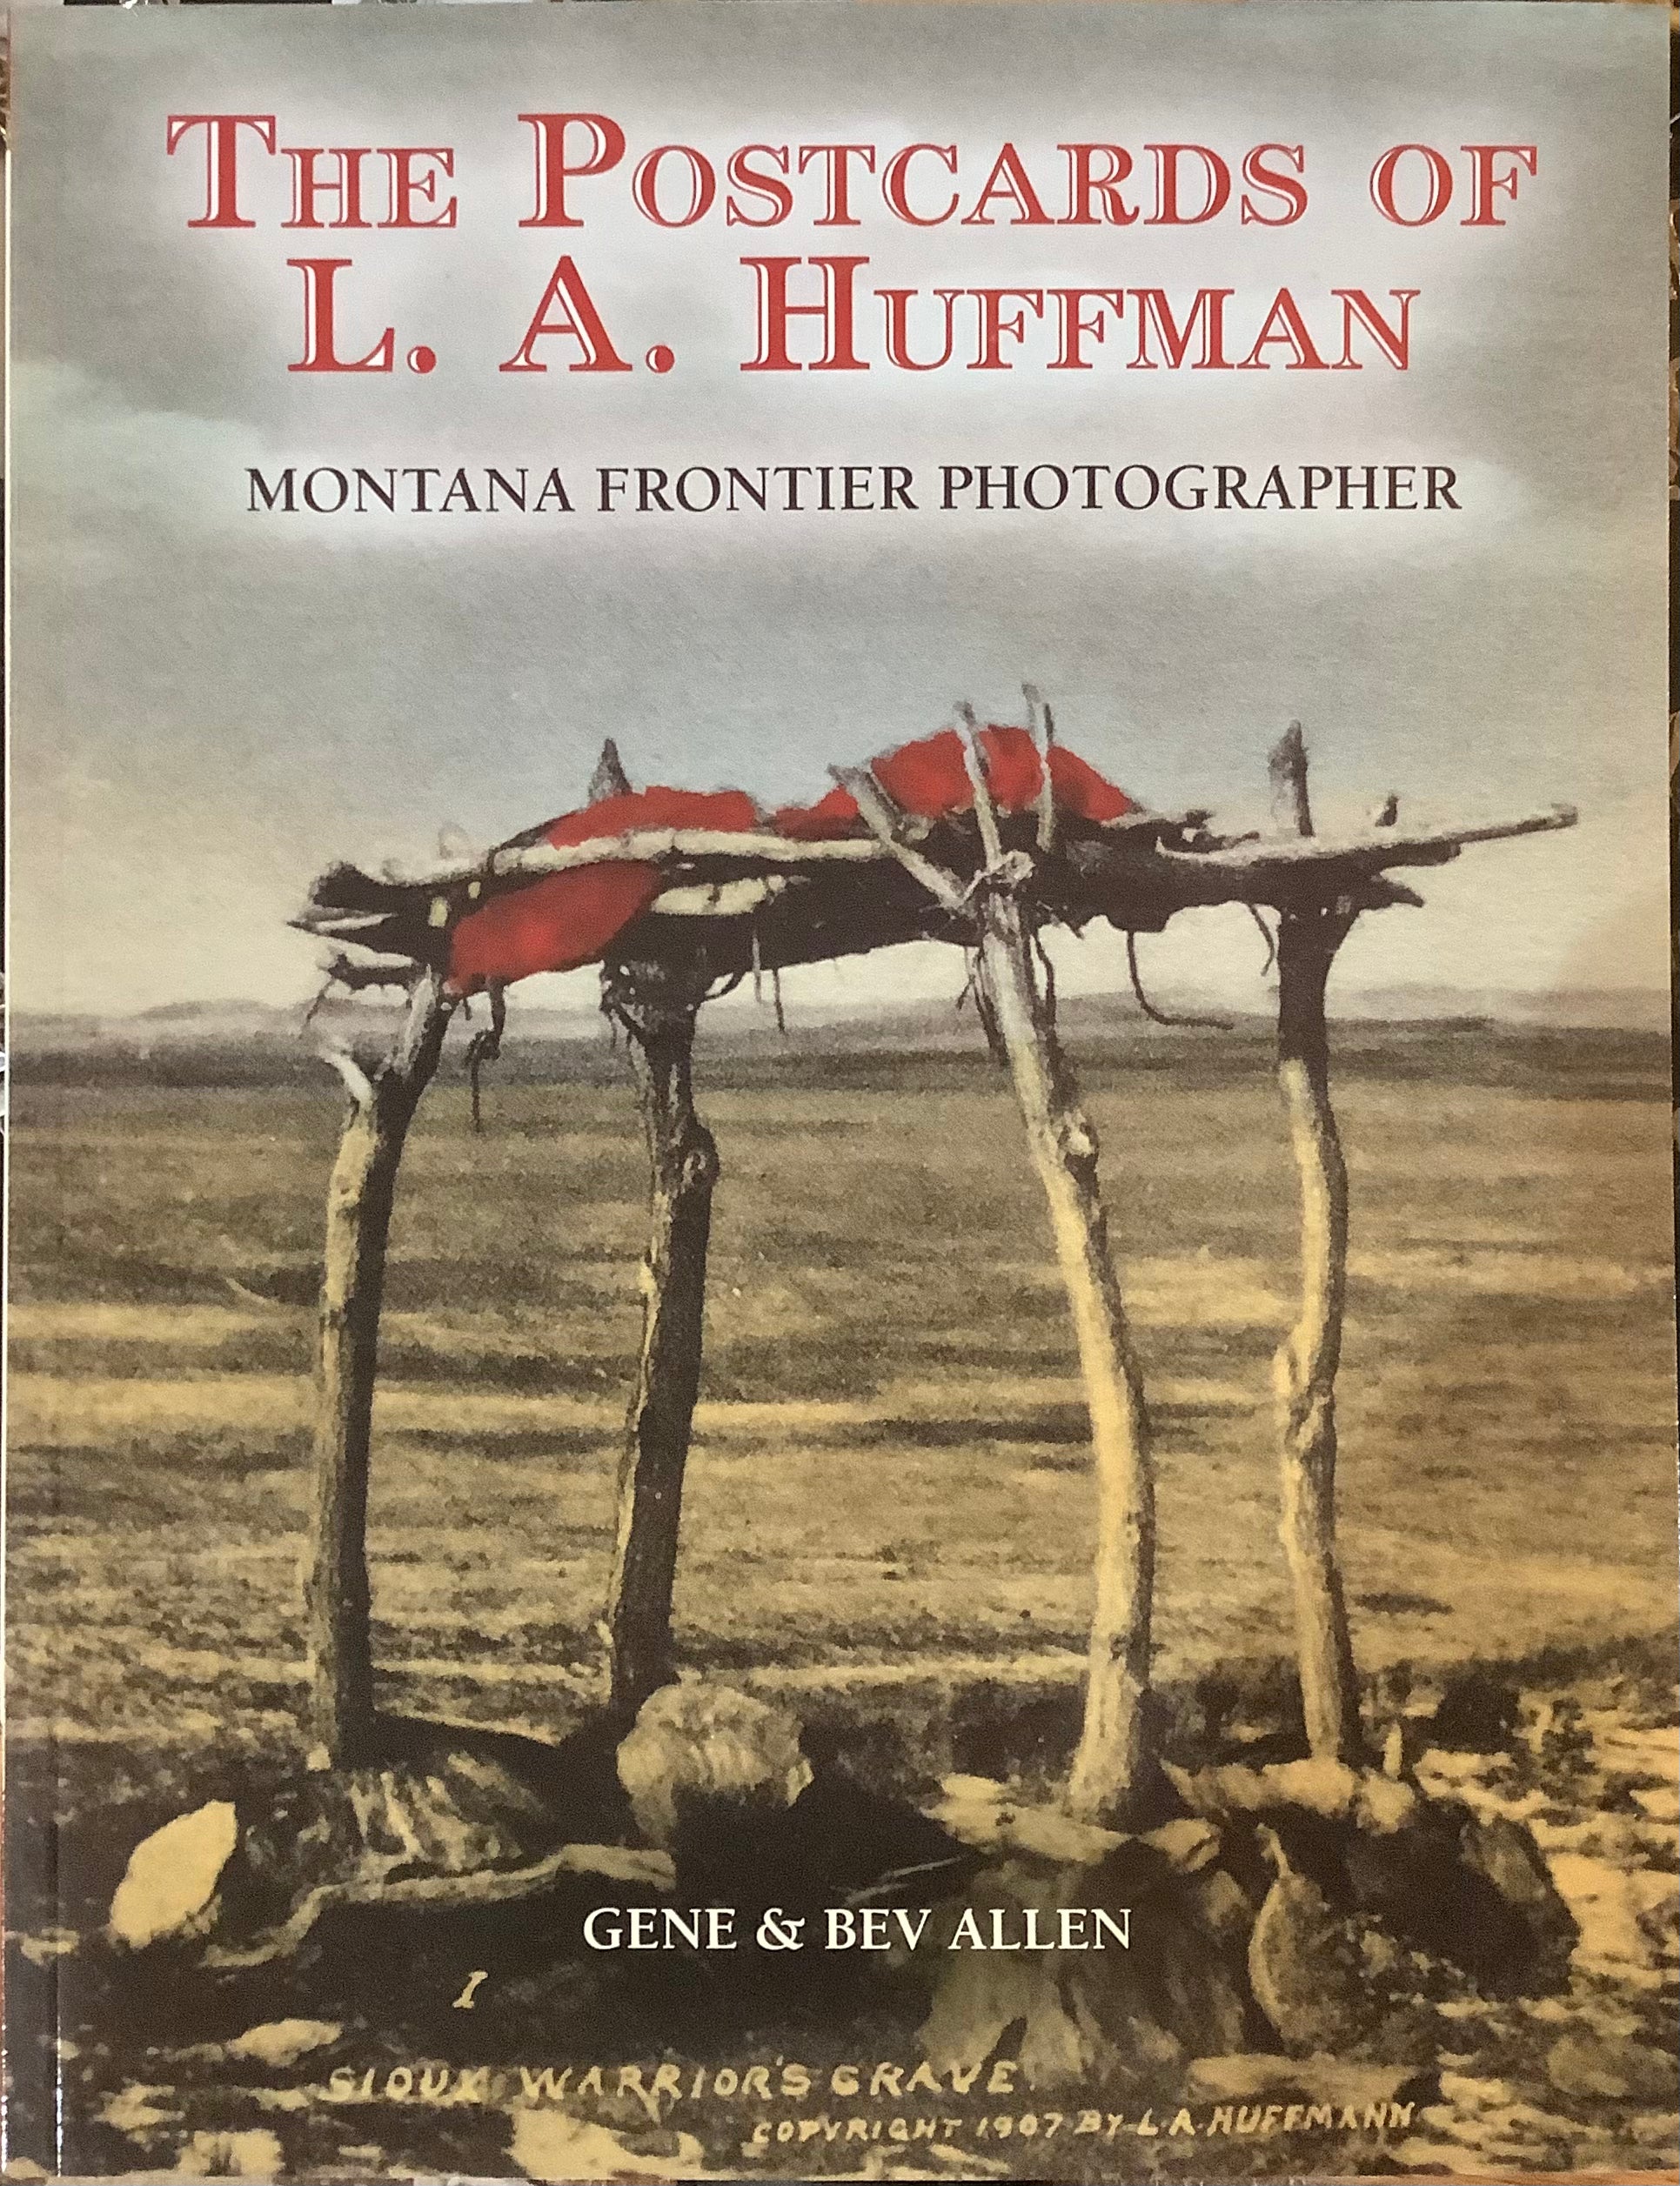 BOOKS - The Postcards of L.A. Huffman